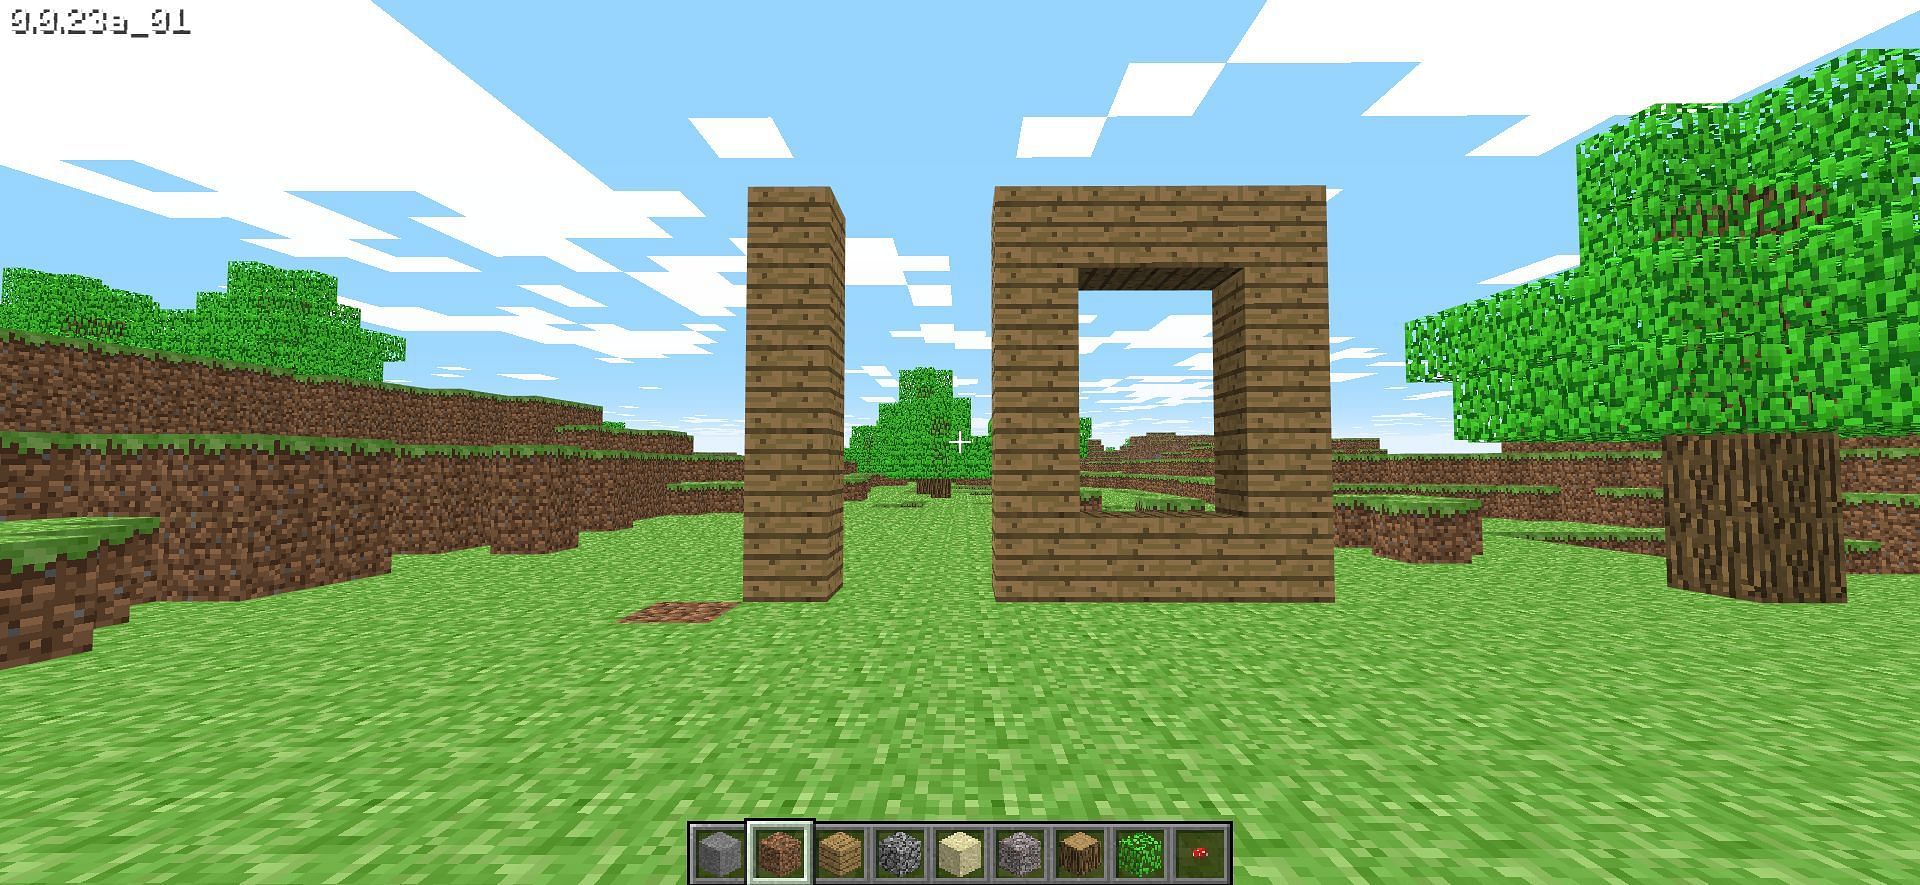 This game can be played for free (Image via Minecraft)